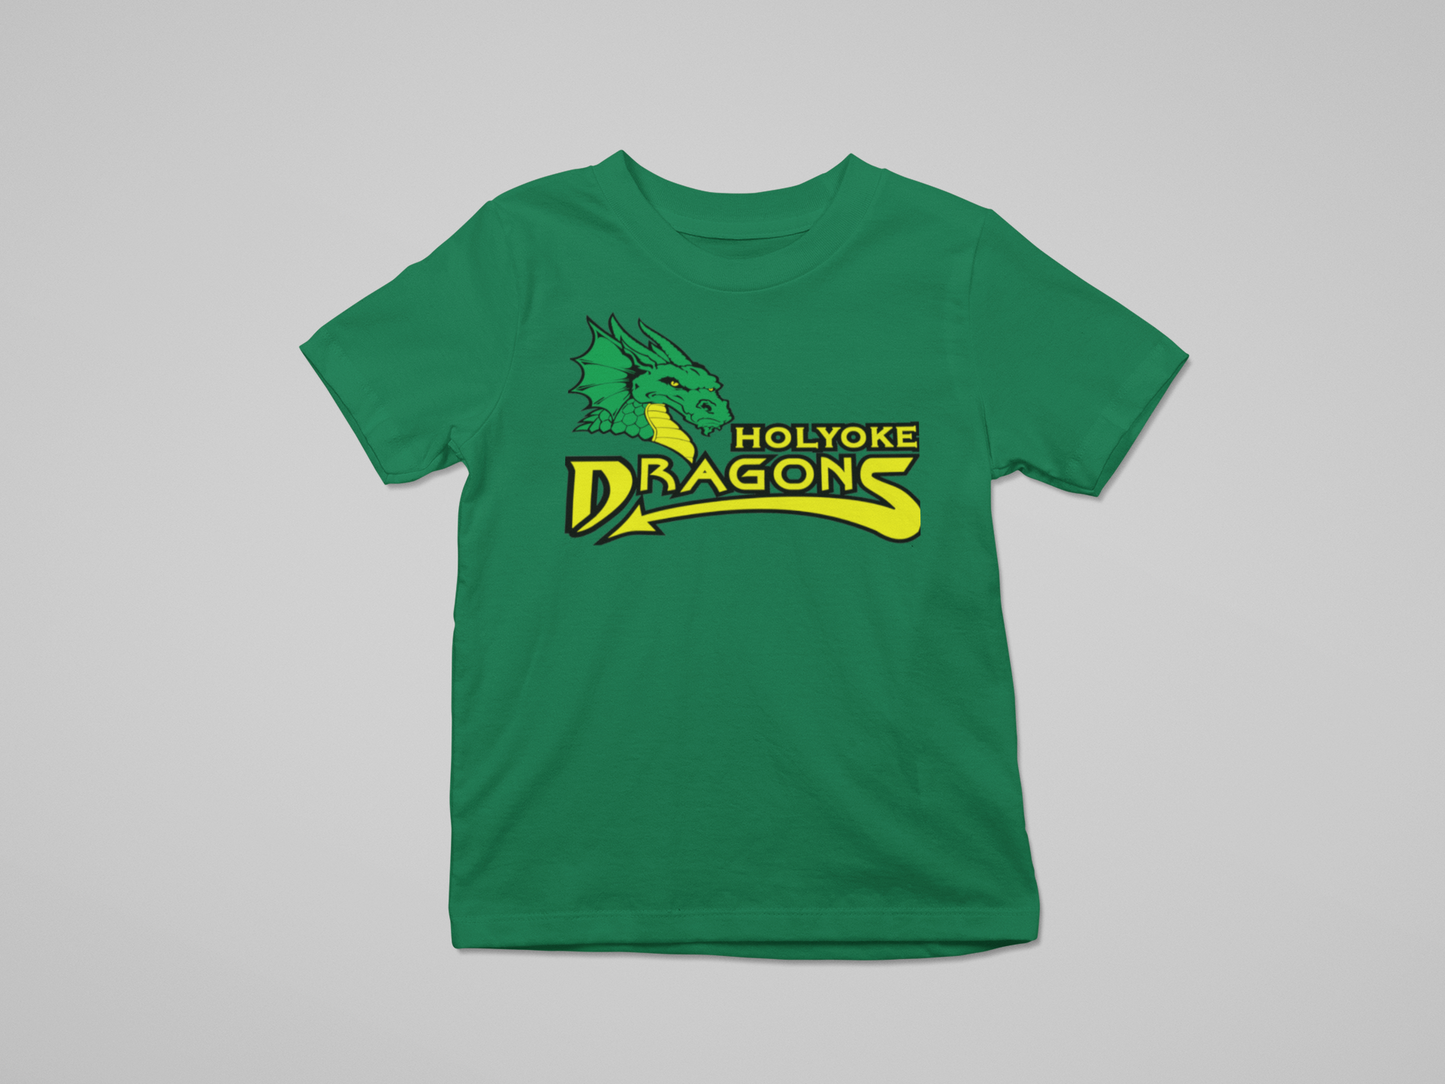 holyoke dragons toddler t-shirt: for cute dragons fans only!